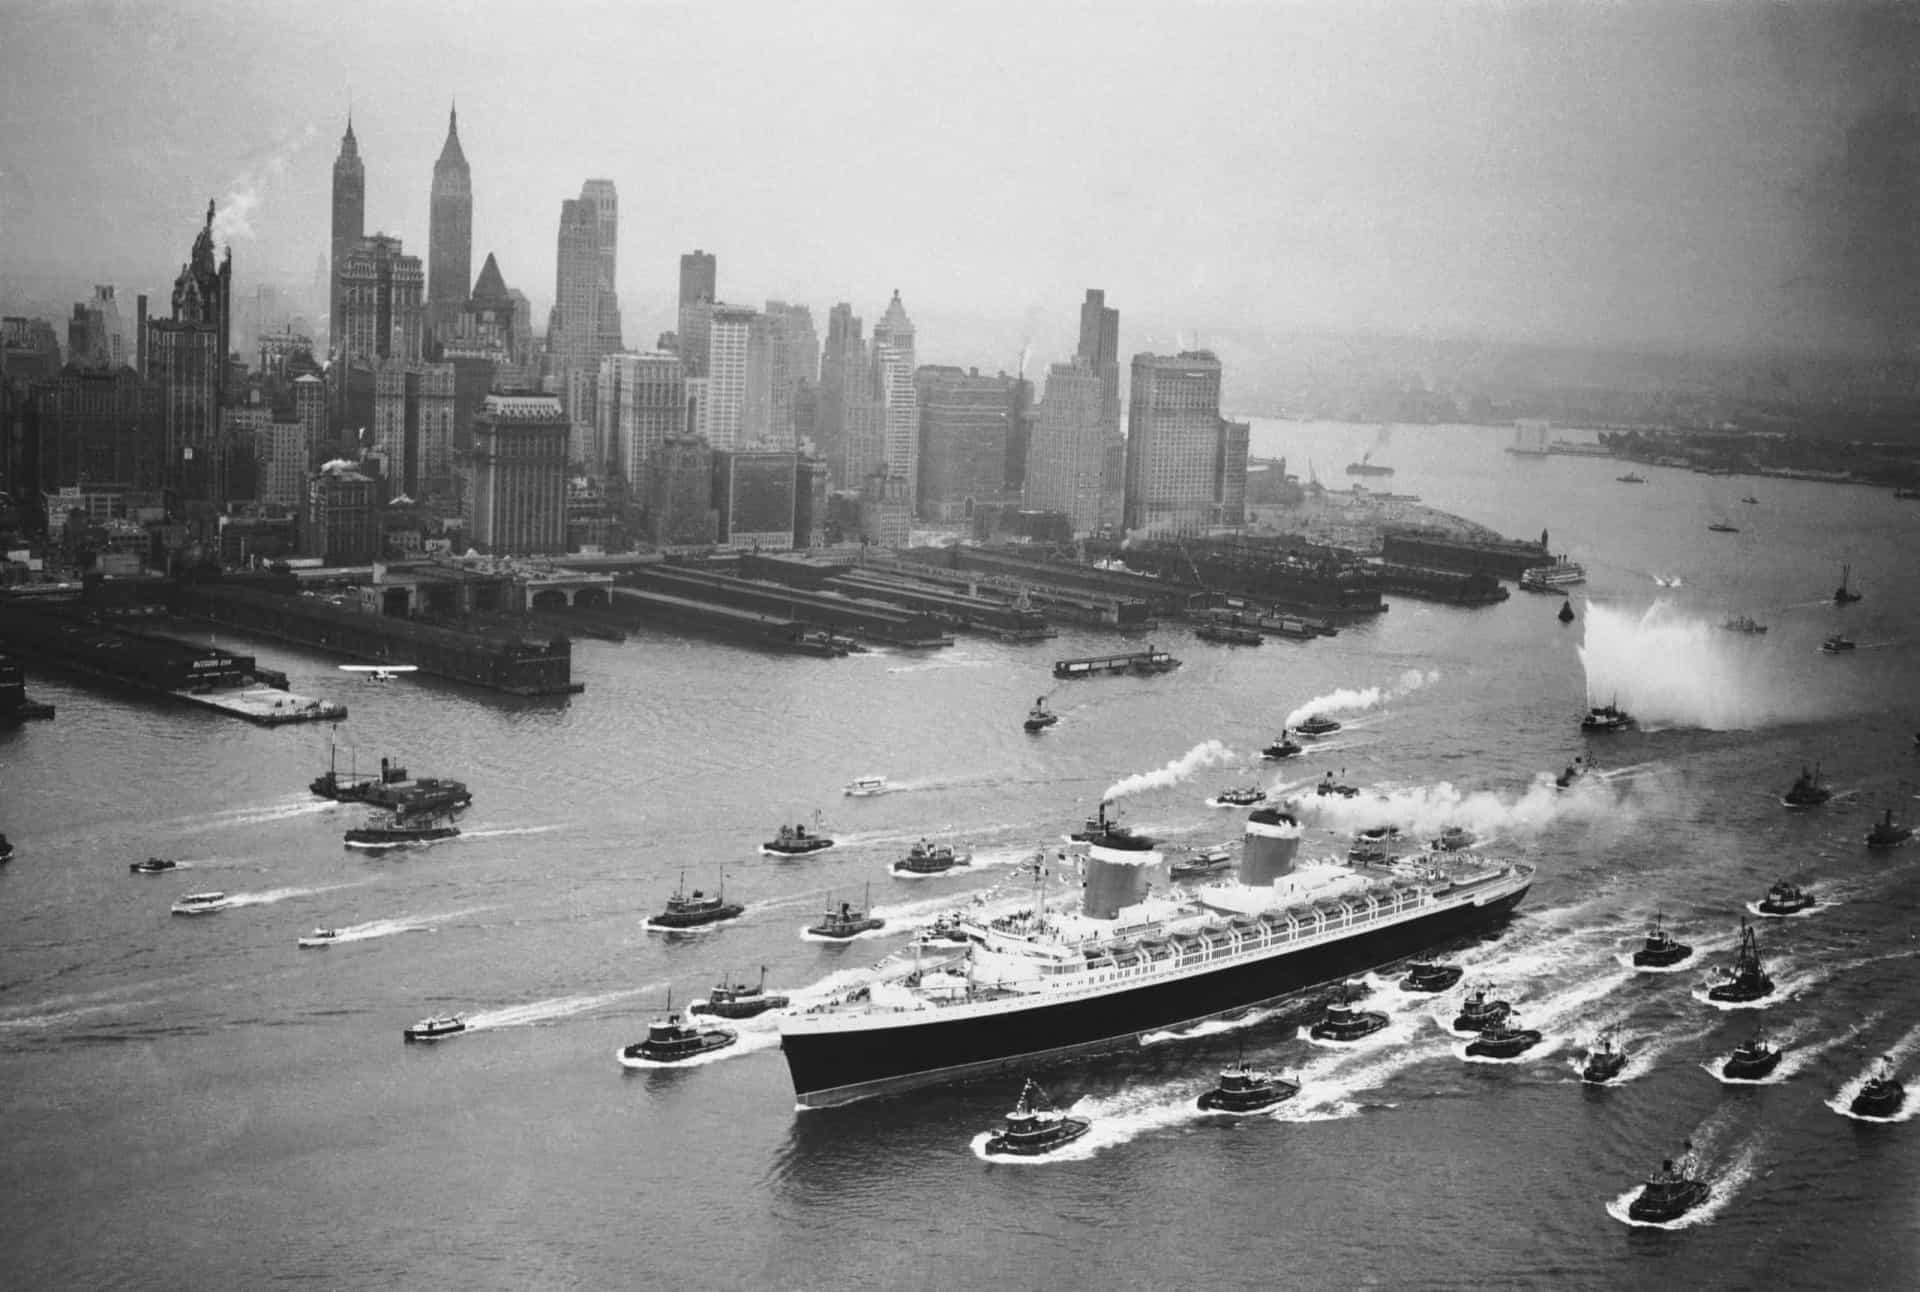 <p>The 1950s are generally regarded as the Golden Age of cruising. And the appeal of taking to water on a luxury ocean-going liner was not lost on the celebrities of the day.Pictured is the SS <em>United States</em>, flagship of the United States Lines, entering New York Harbor on June 23, 1952.</p><p>You may also like:<a href="https://www.starsinsider.com/n/484448?utm_source=msn.com&utm_medium=display&utm_campaign=referral_description&utm_content=597926en-za"> History's greatest archaeological discoveries</a></p>